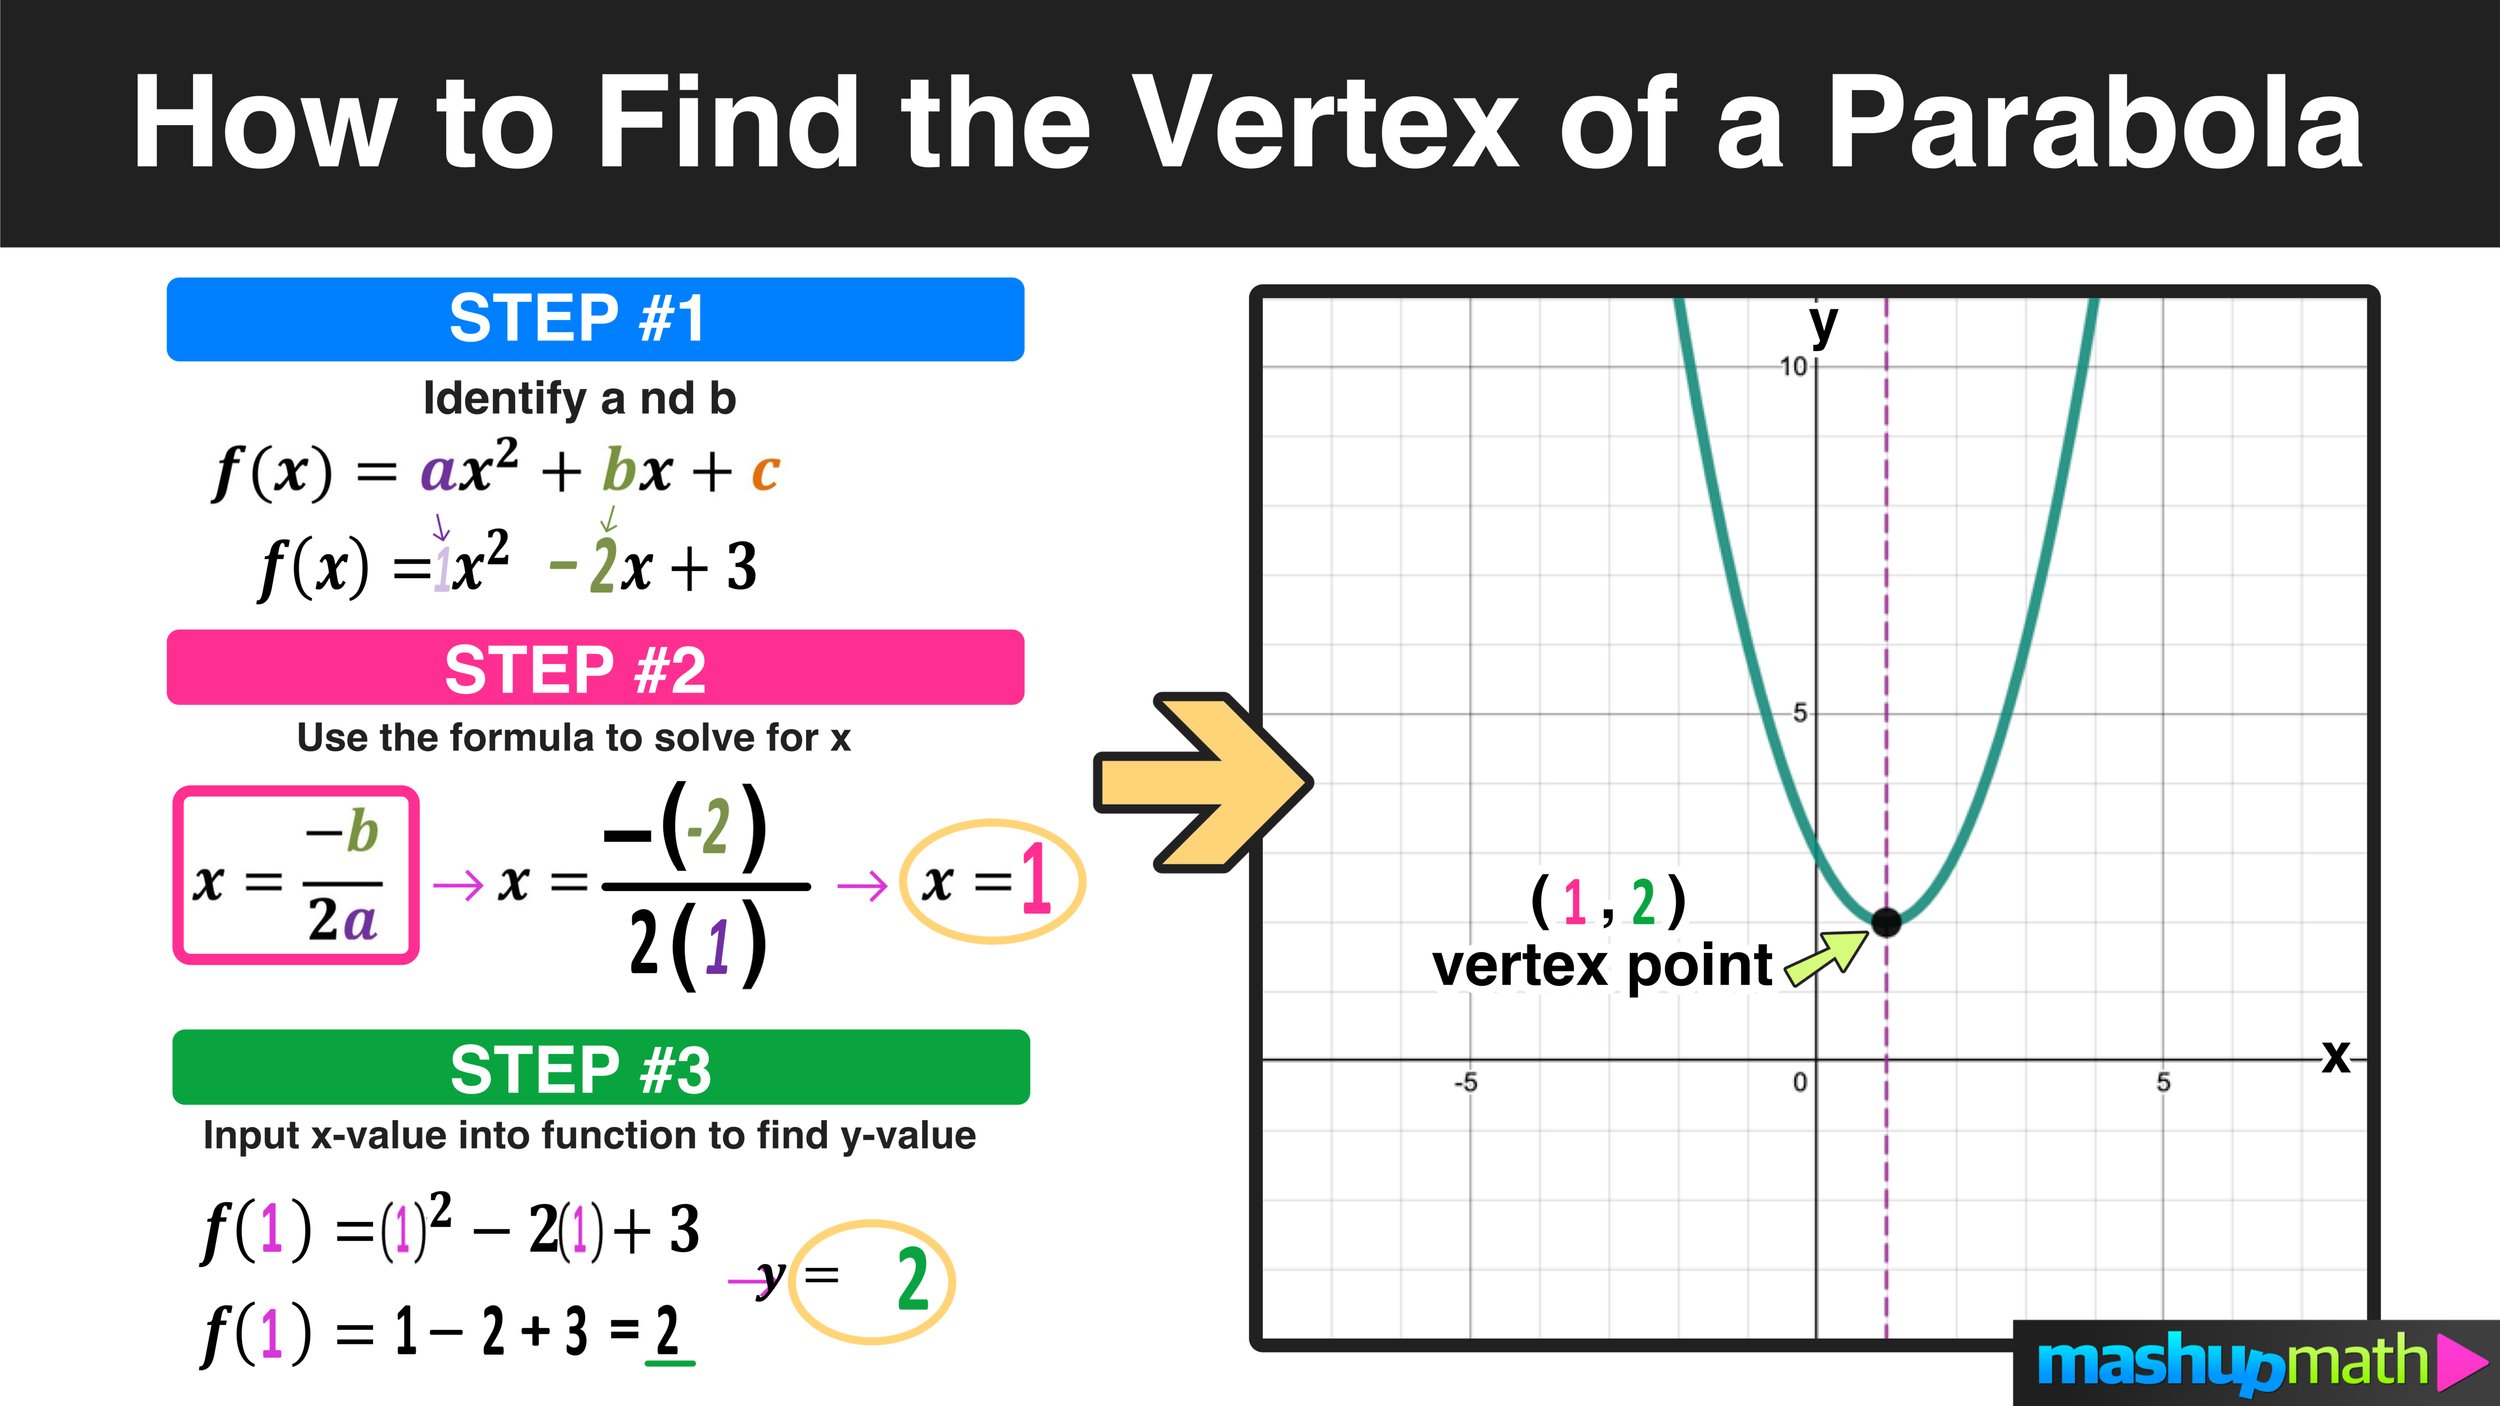 How to Find the Vertex of a Parabola in 3 Easy Steps — Mashup Math